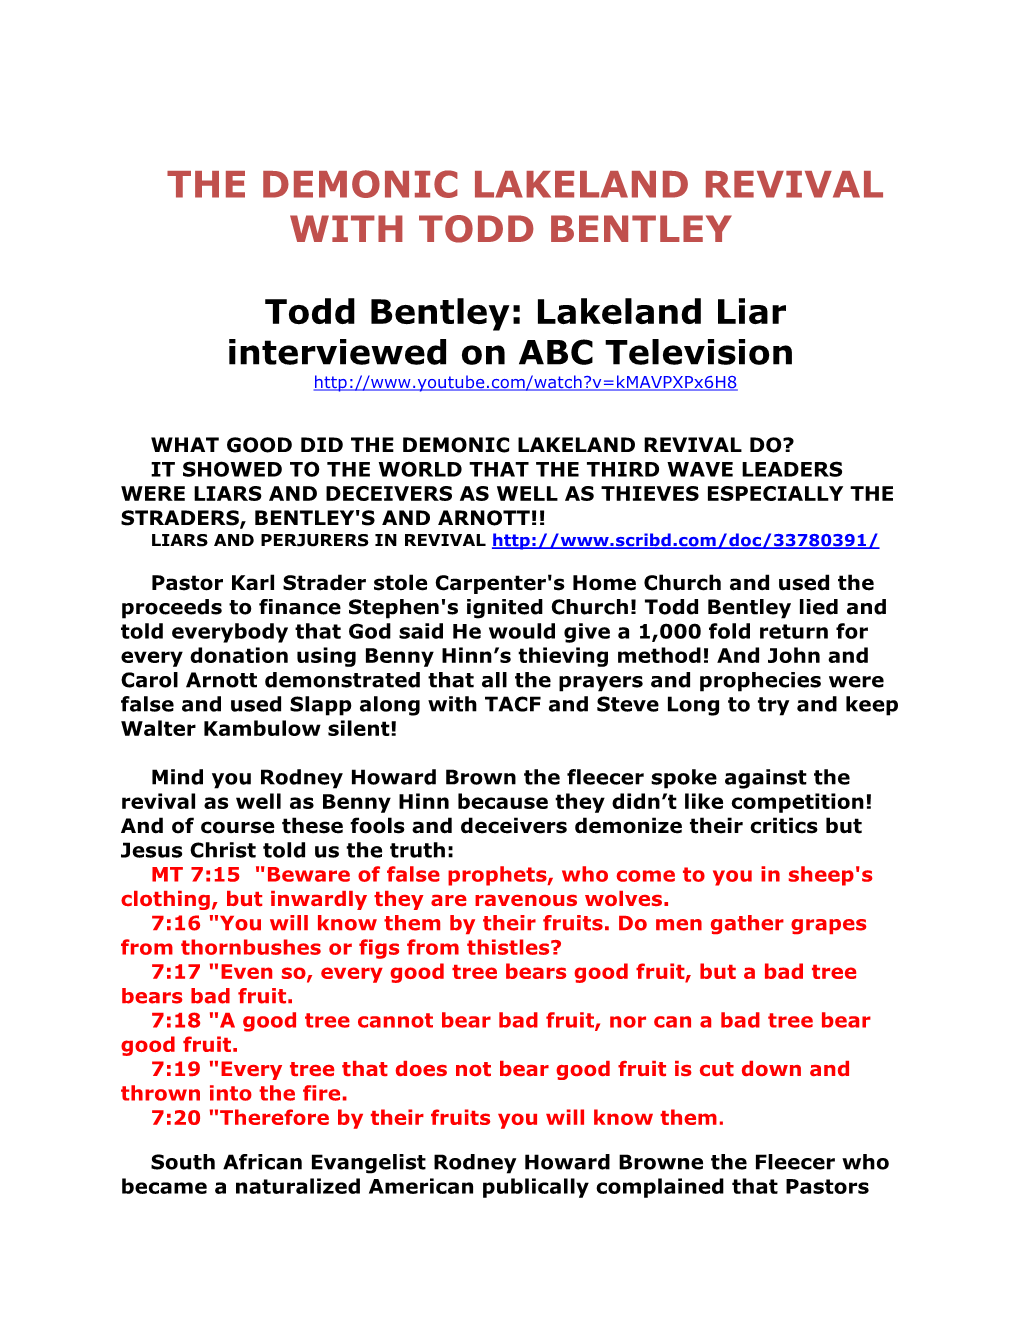 Lakeland Revival with Todd Bentley